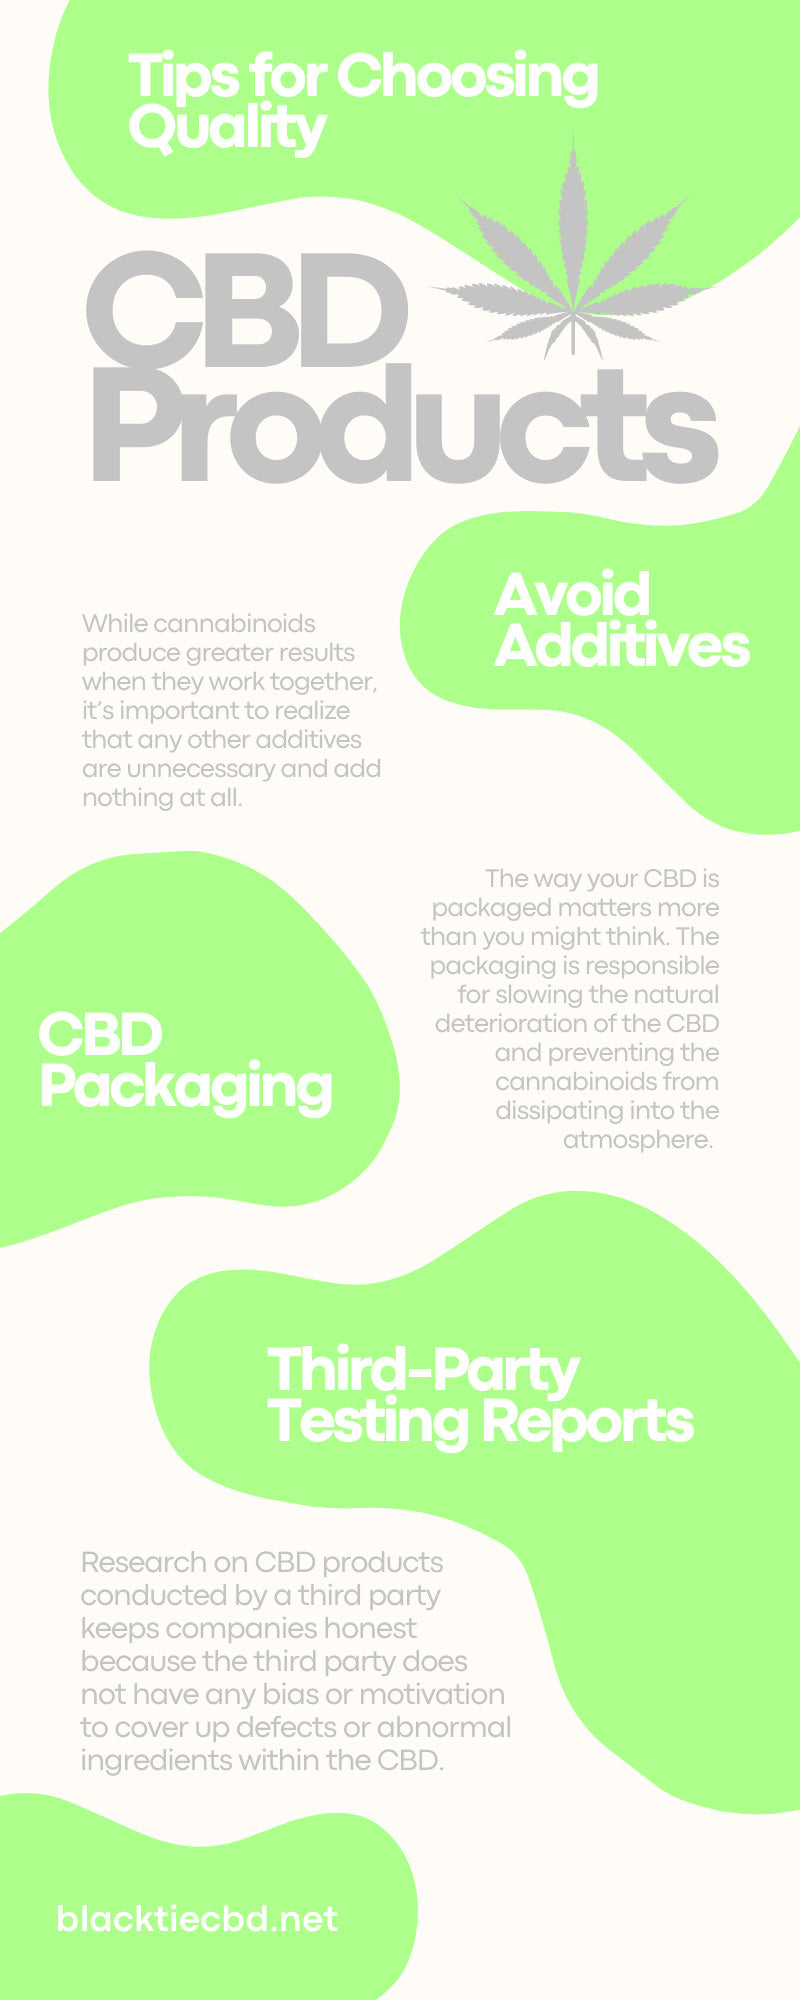 Tips for Choosing Quality CBD Products